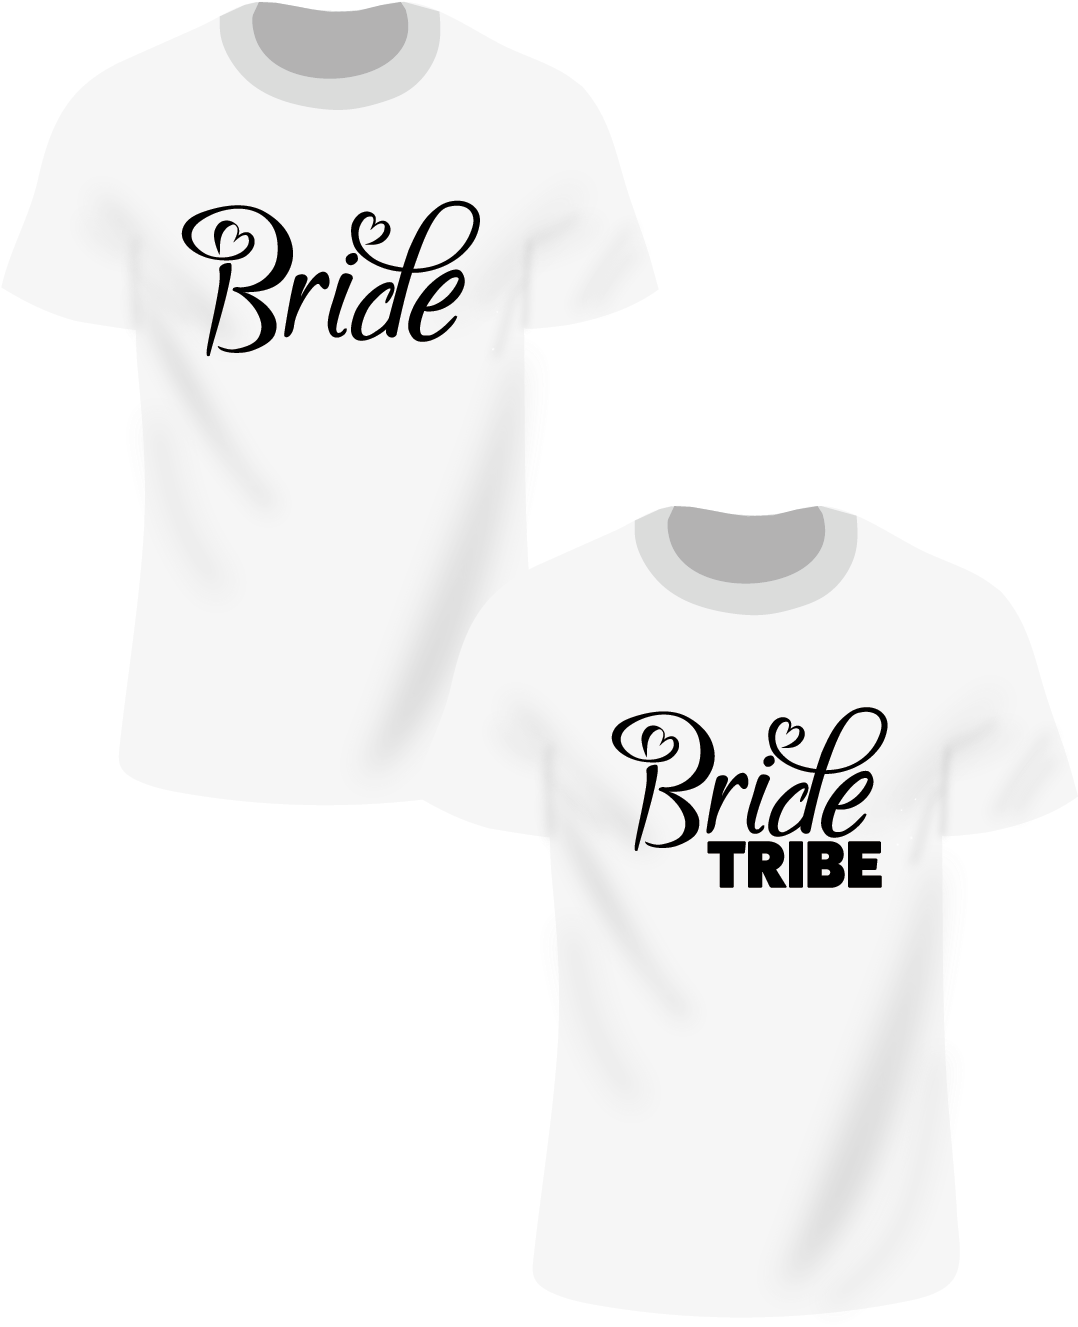 Brideand Bride Tribe T Shirts PNG image